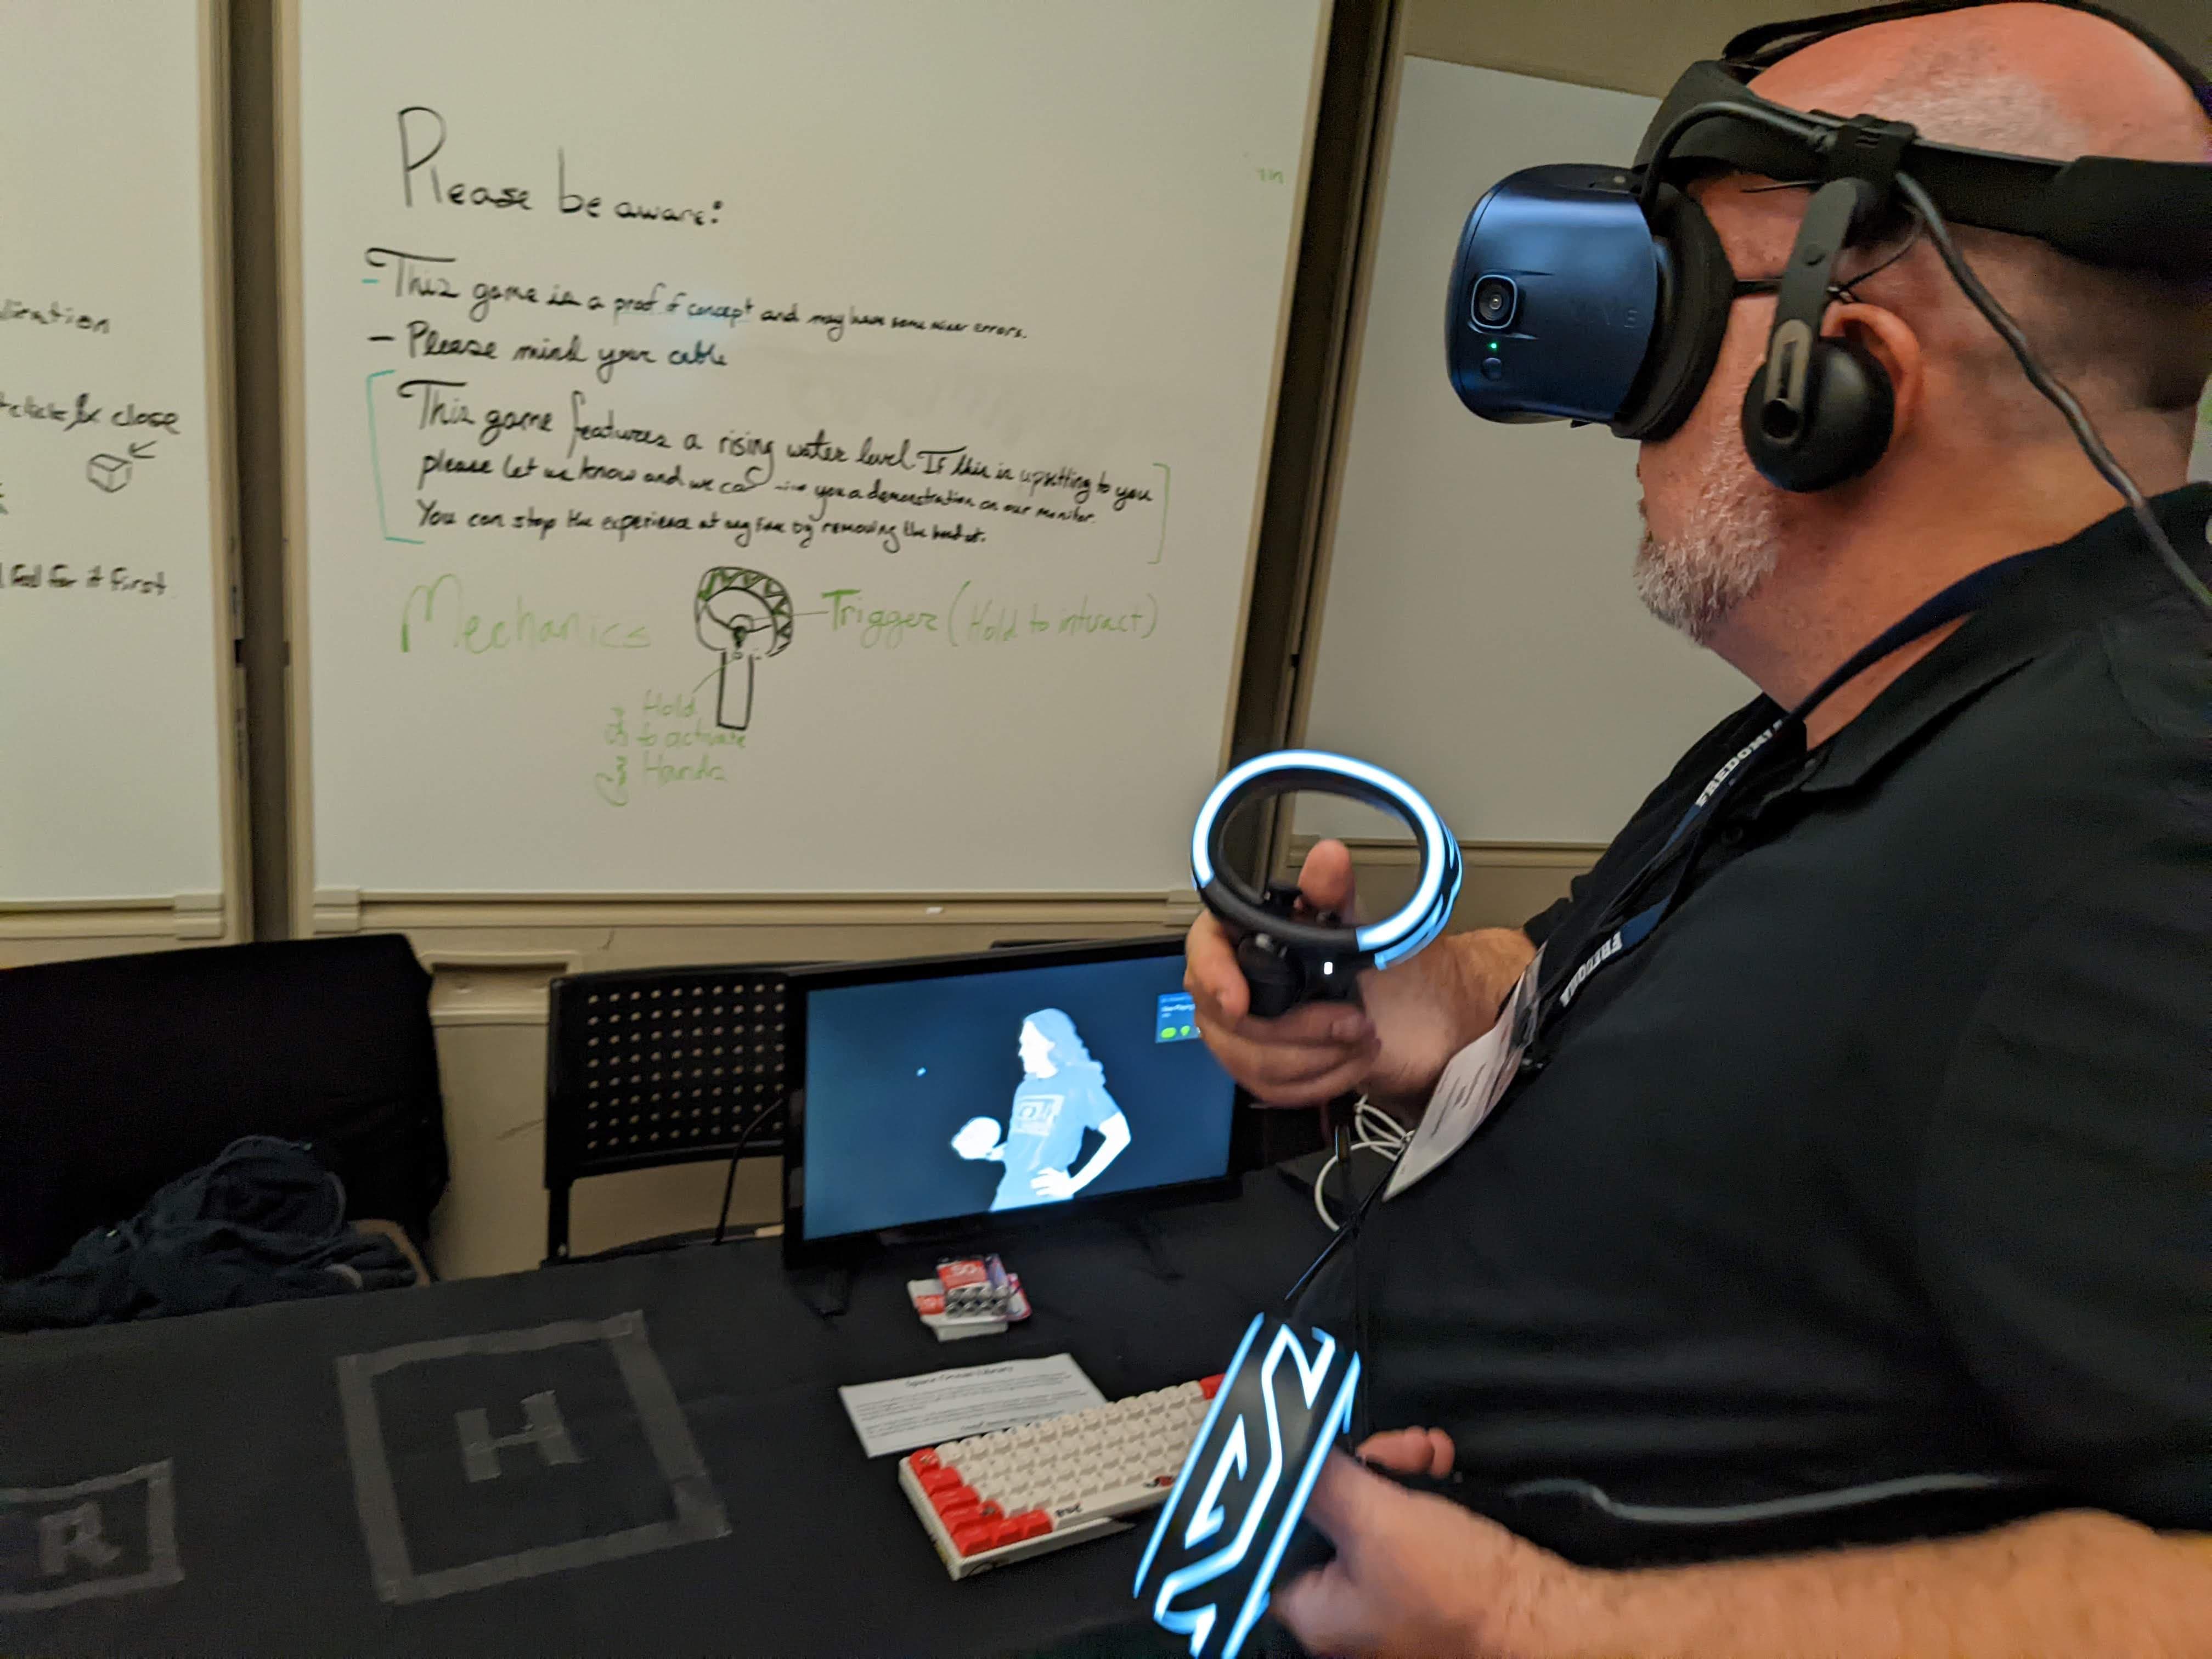 A person interacts with a VR experience while wearing a headset and operating a set of controllers